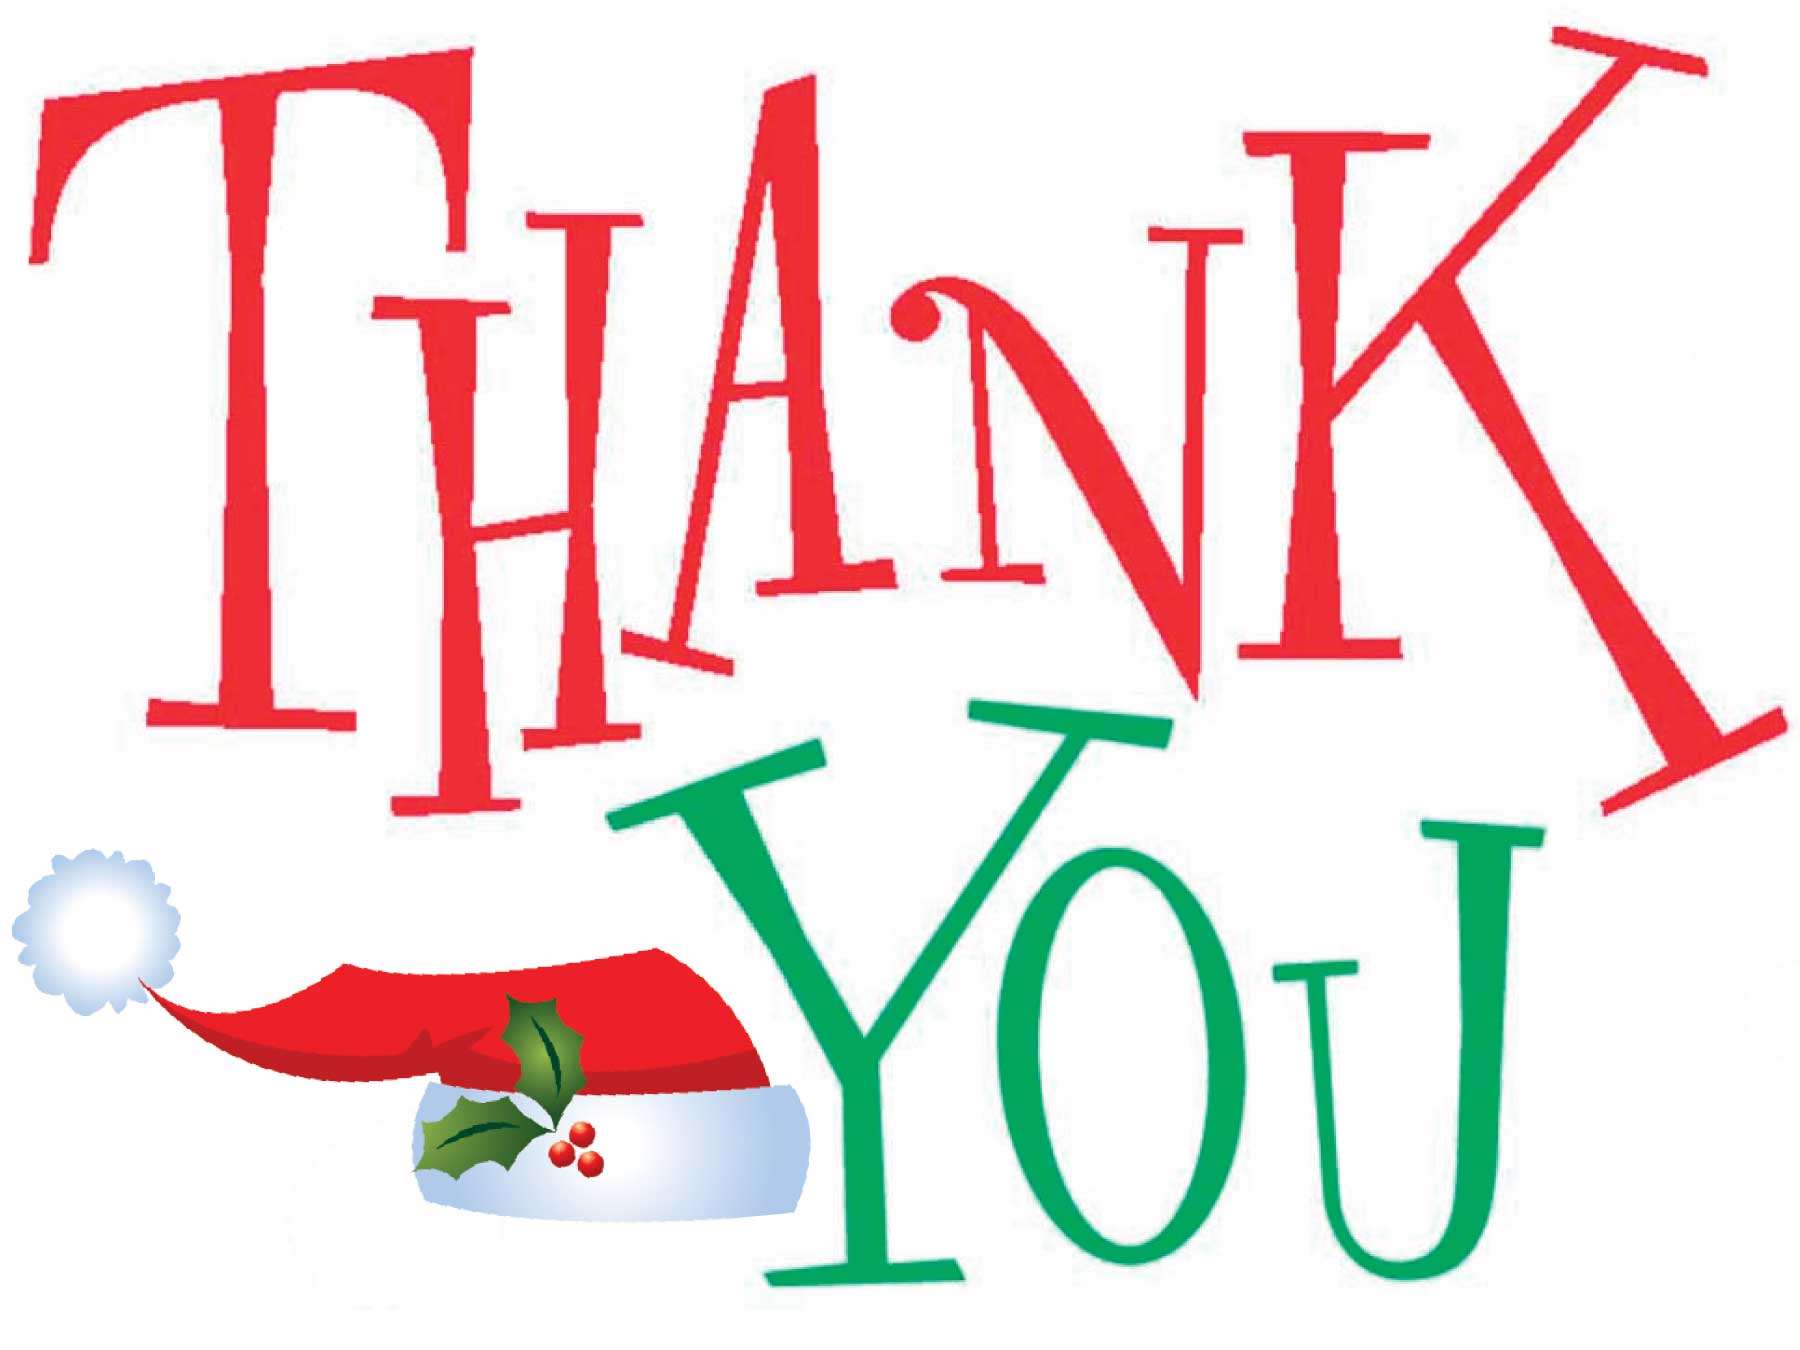 Huge Thank You To Kathy   Clipart Panda   Free Clipart Images